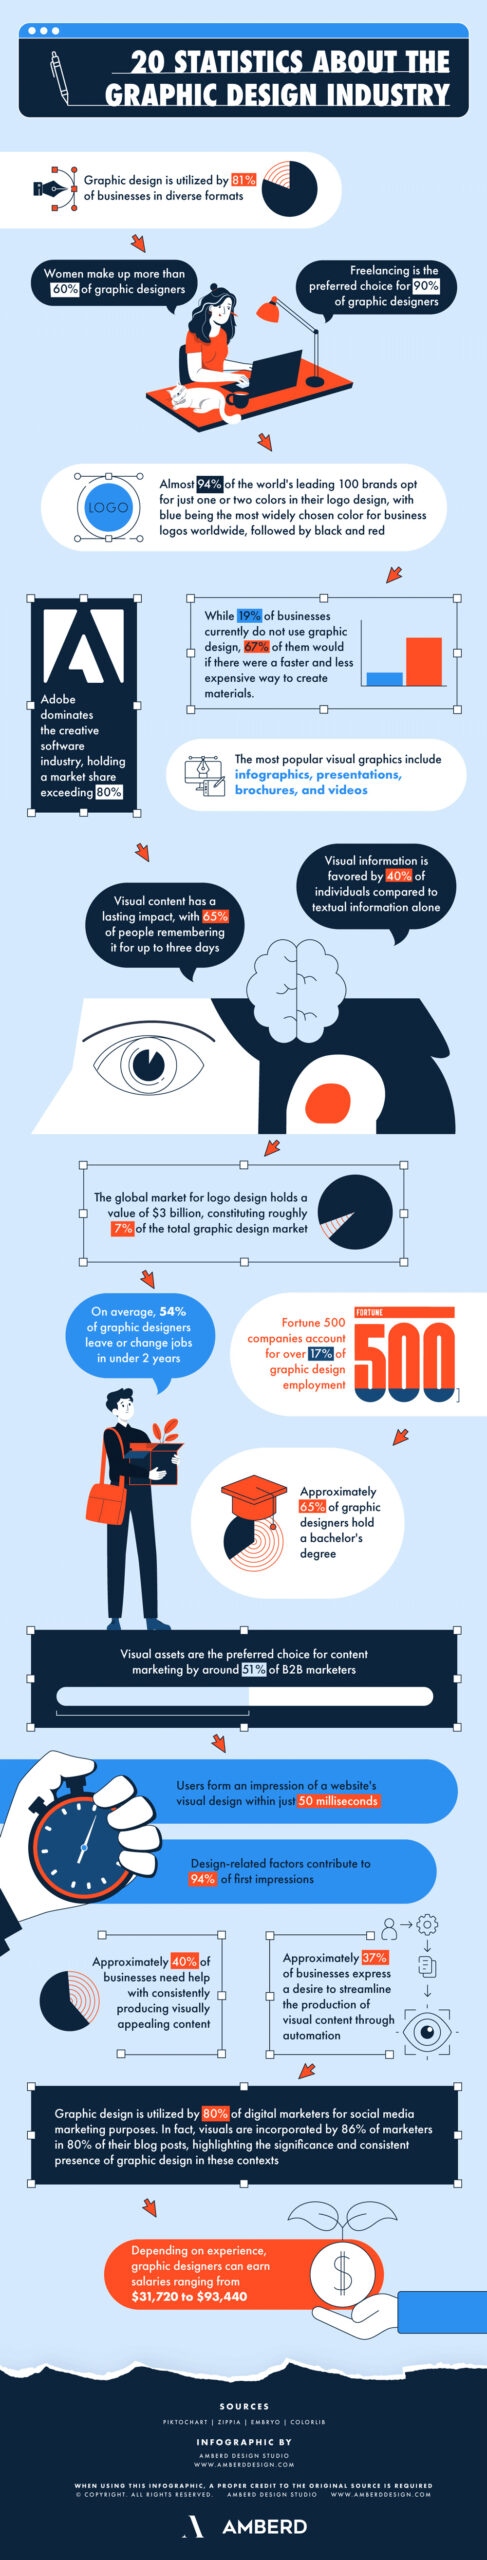 20 graphic design statistics and facts infographic